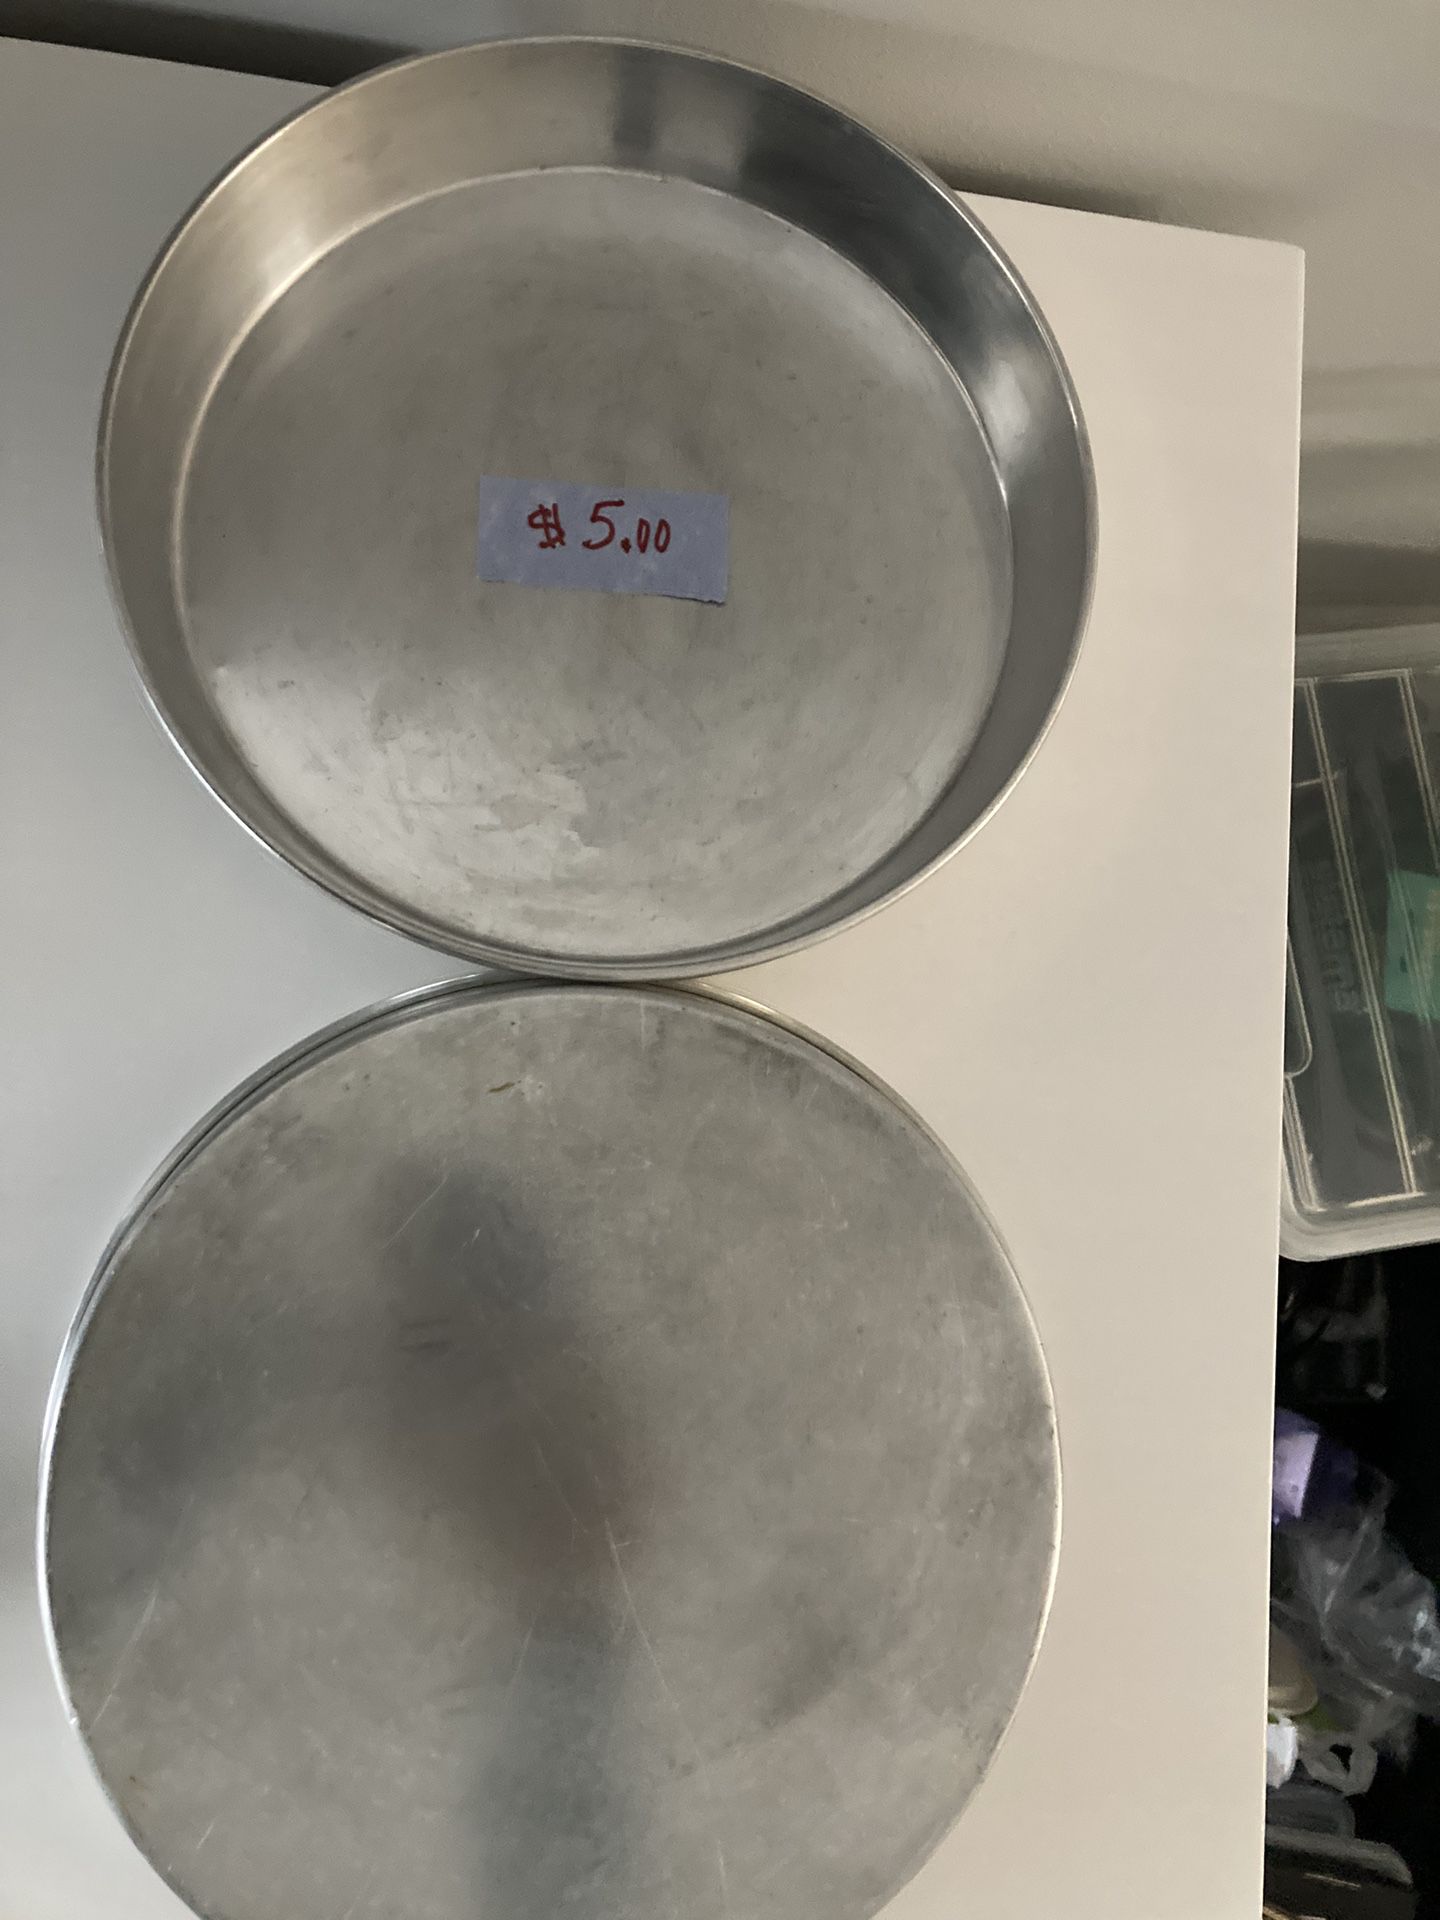 Baking Dishes - $5 For Both 